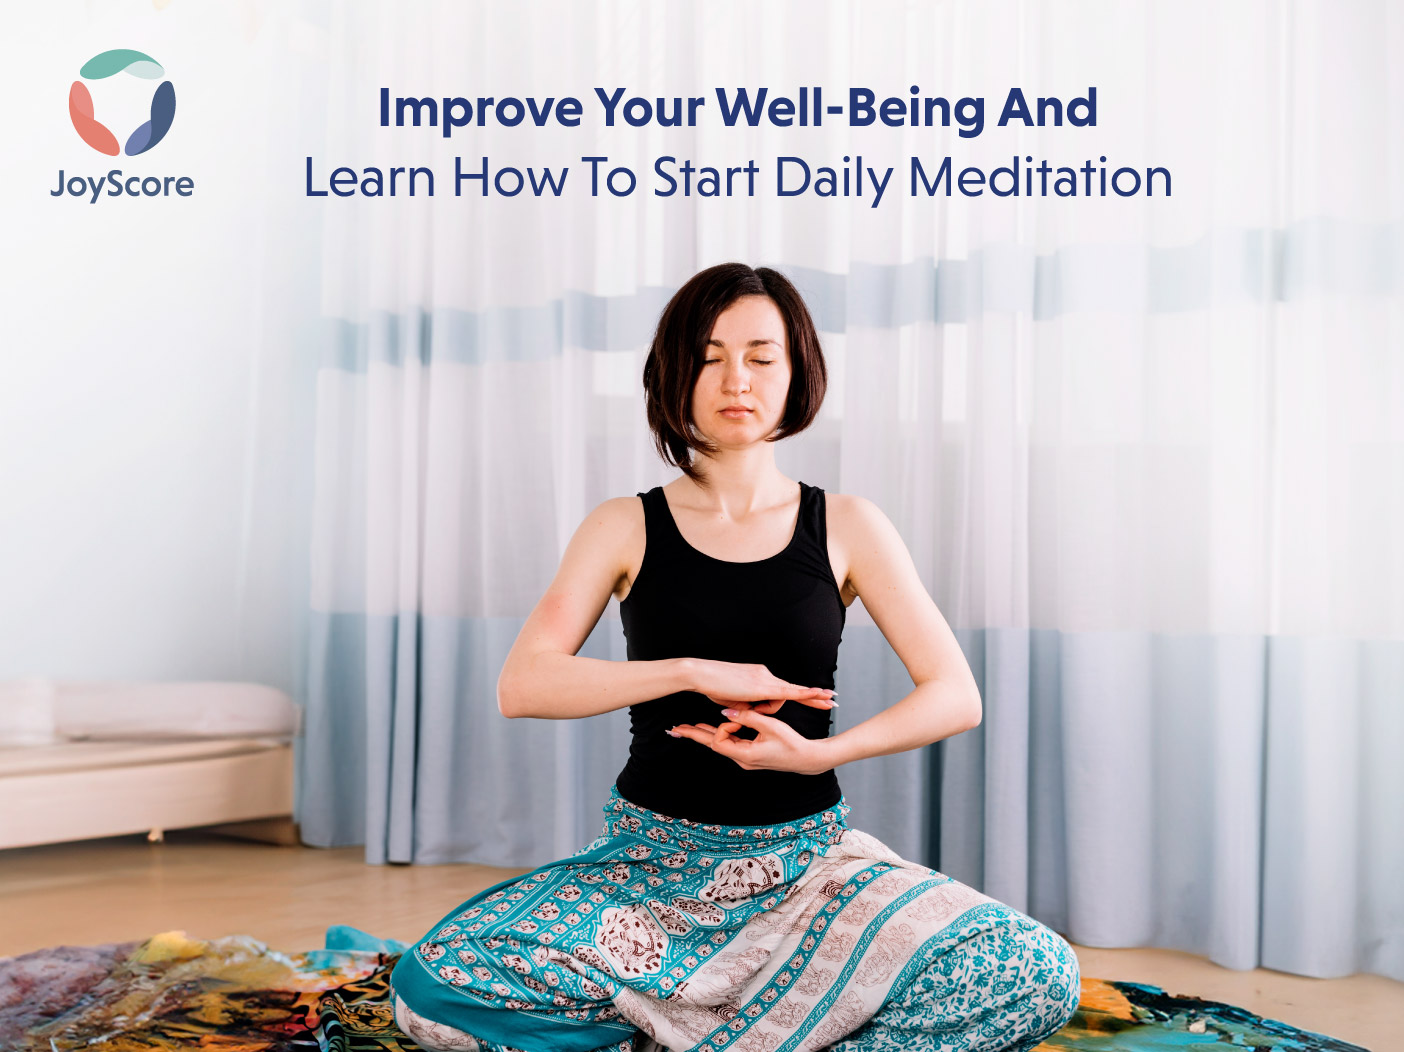 IMPROVE YOUR WELL-BEING AND LEARN HOW TO START DAILY MEDITATION